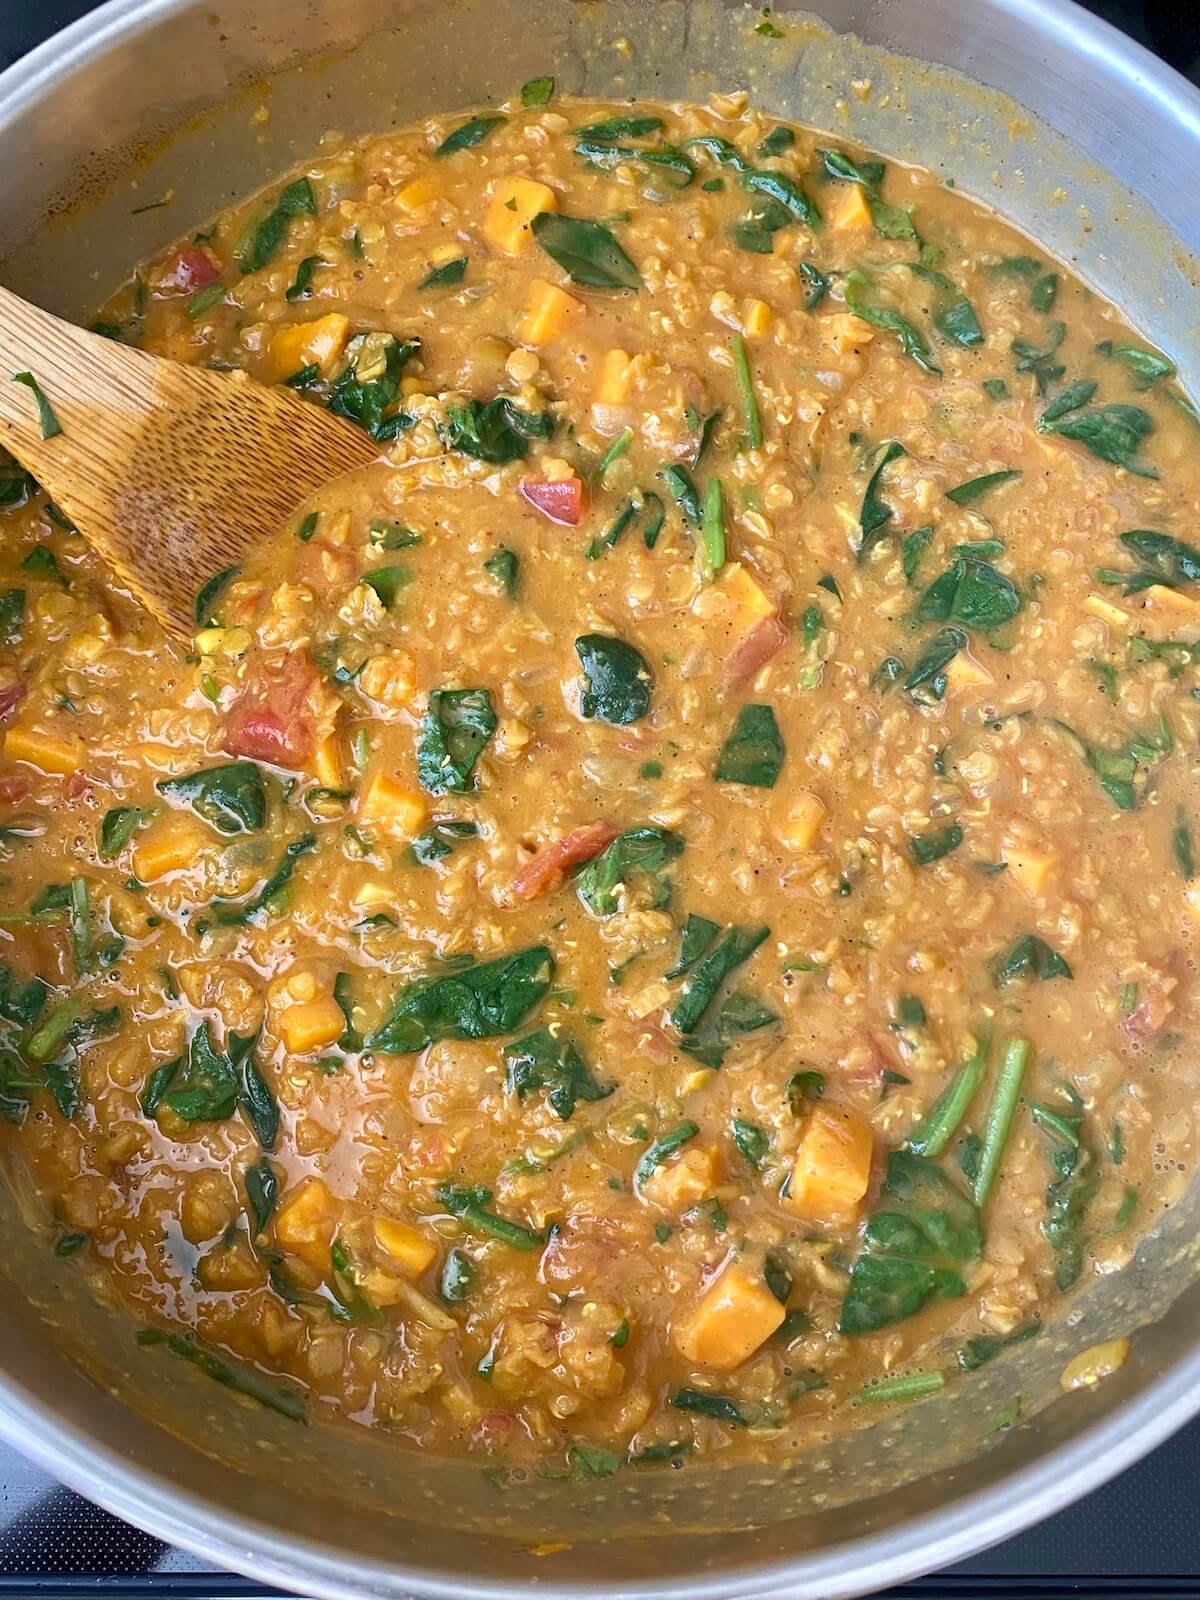 Finished red curry lentils with sweet potatoes and spinach in a stainless steel skillet. There is a wooden spoon sticking out of the pot to the left.